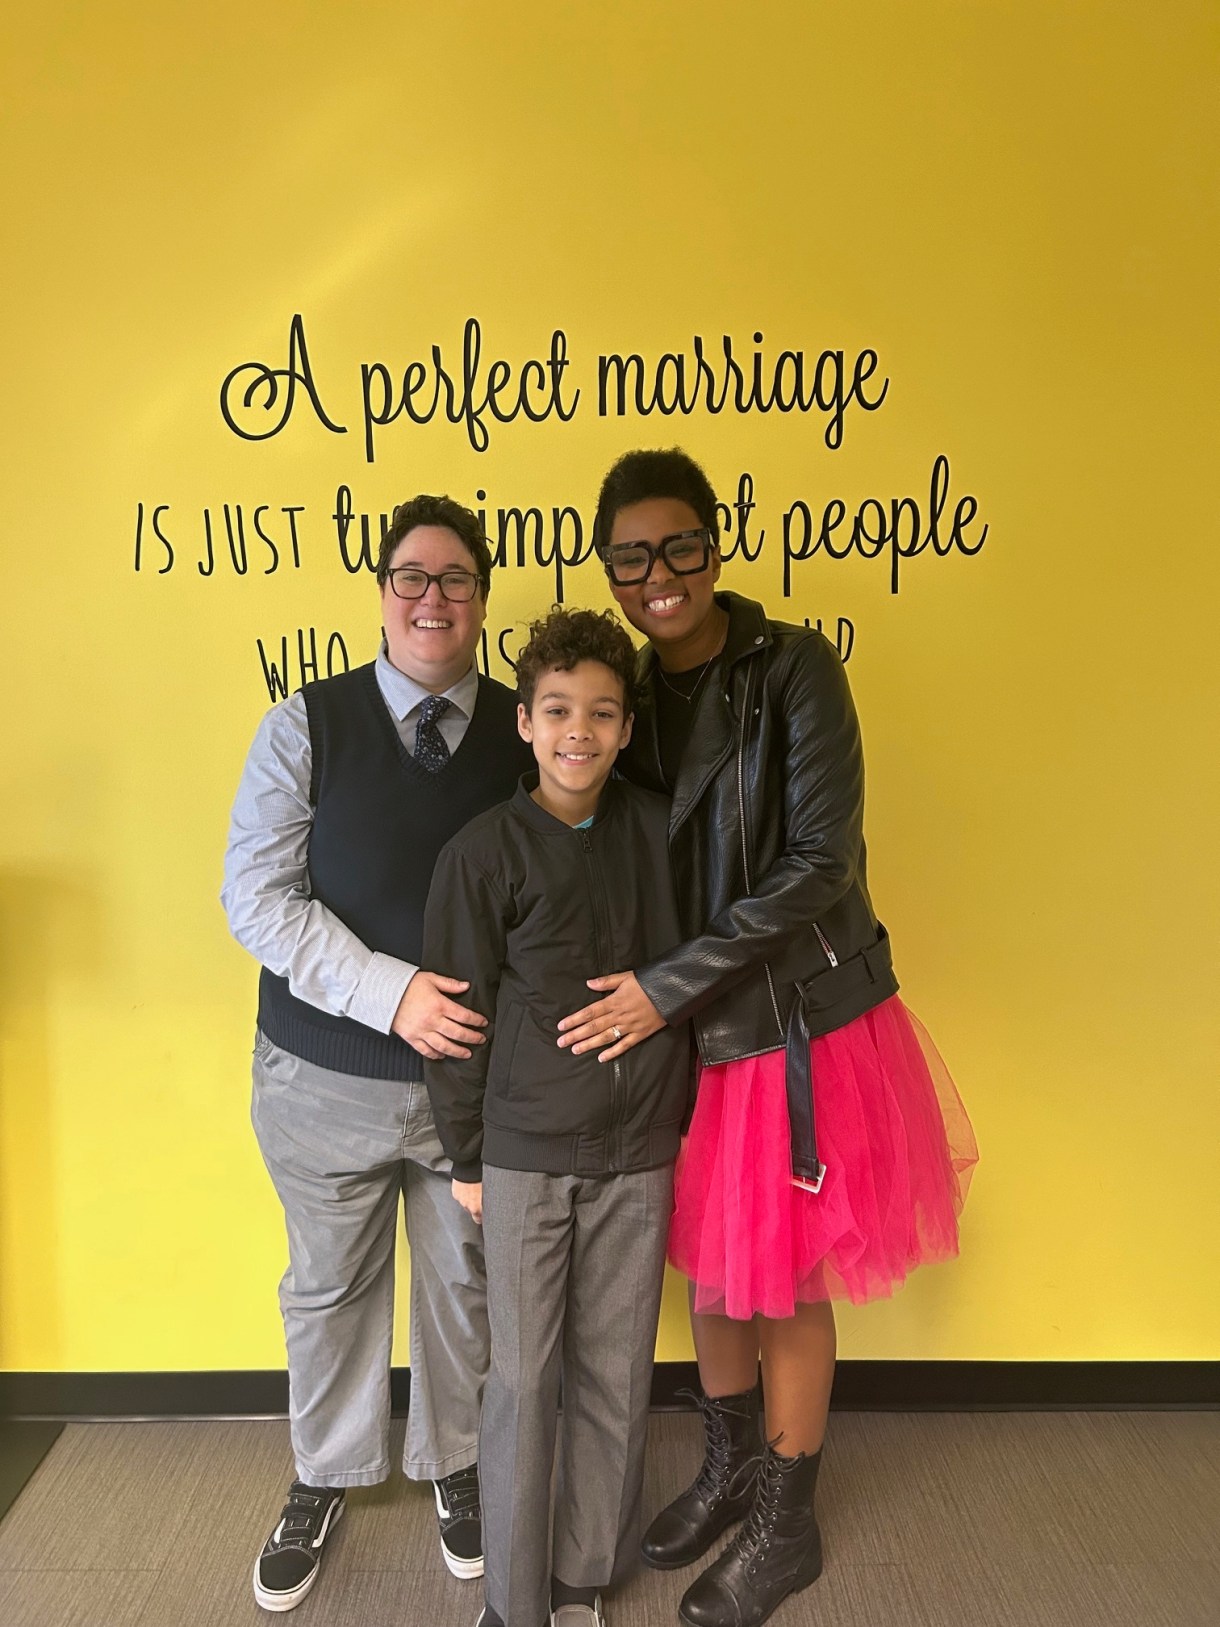 The author (a black woman with short hair) and her wife (a white butch with brown hair) pose against a yellow and green wall on their wedding day with their son.